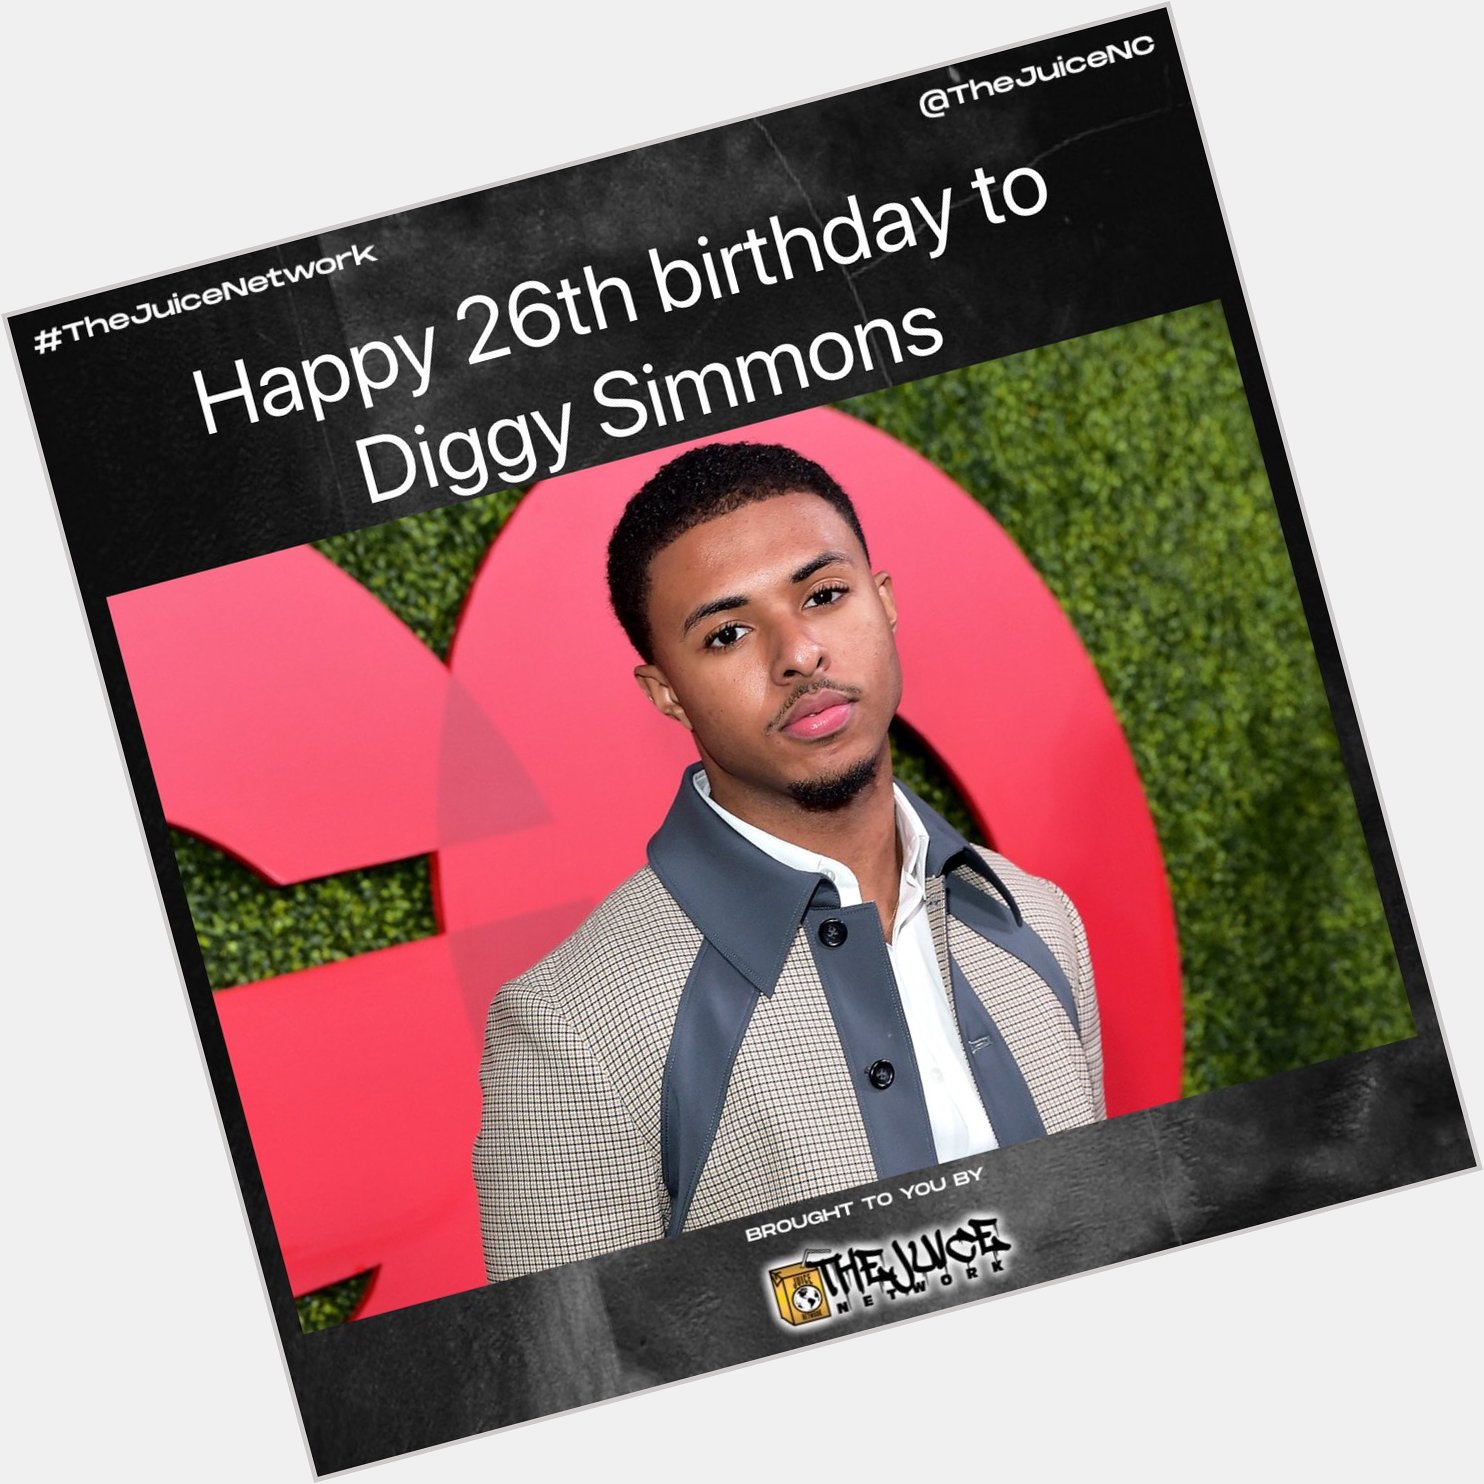 Happy 26th birthday to Diggy Simmons!    